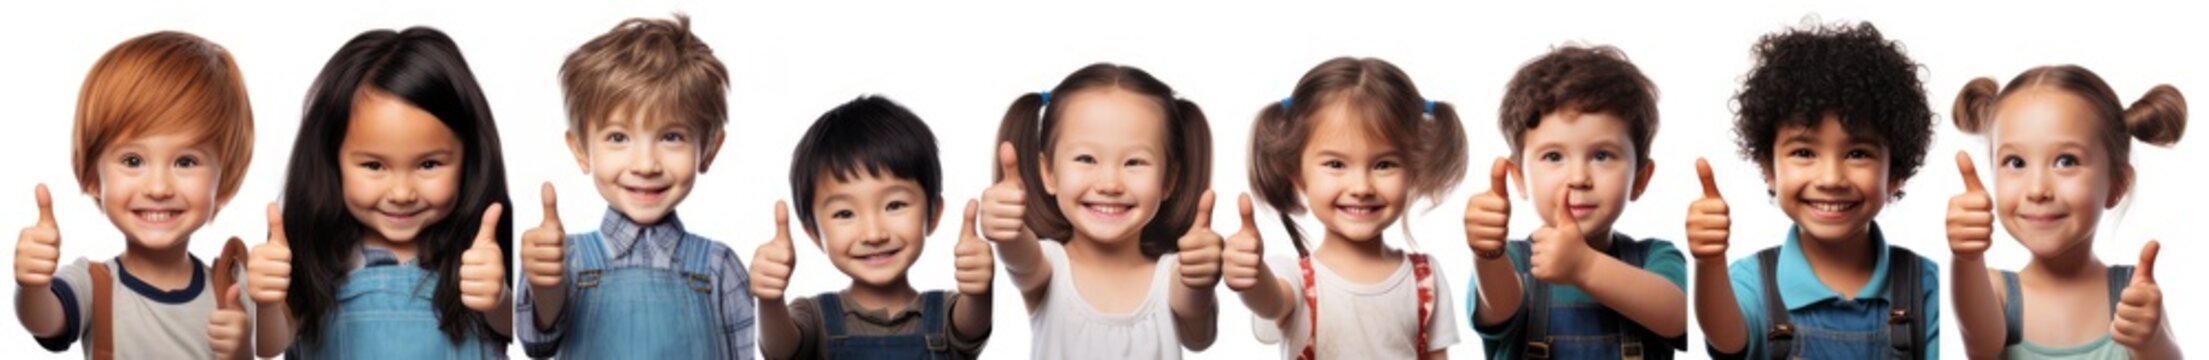 Set of smiling children giving a thumbs up isolated on white background